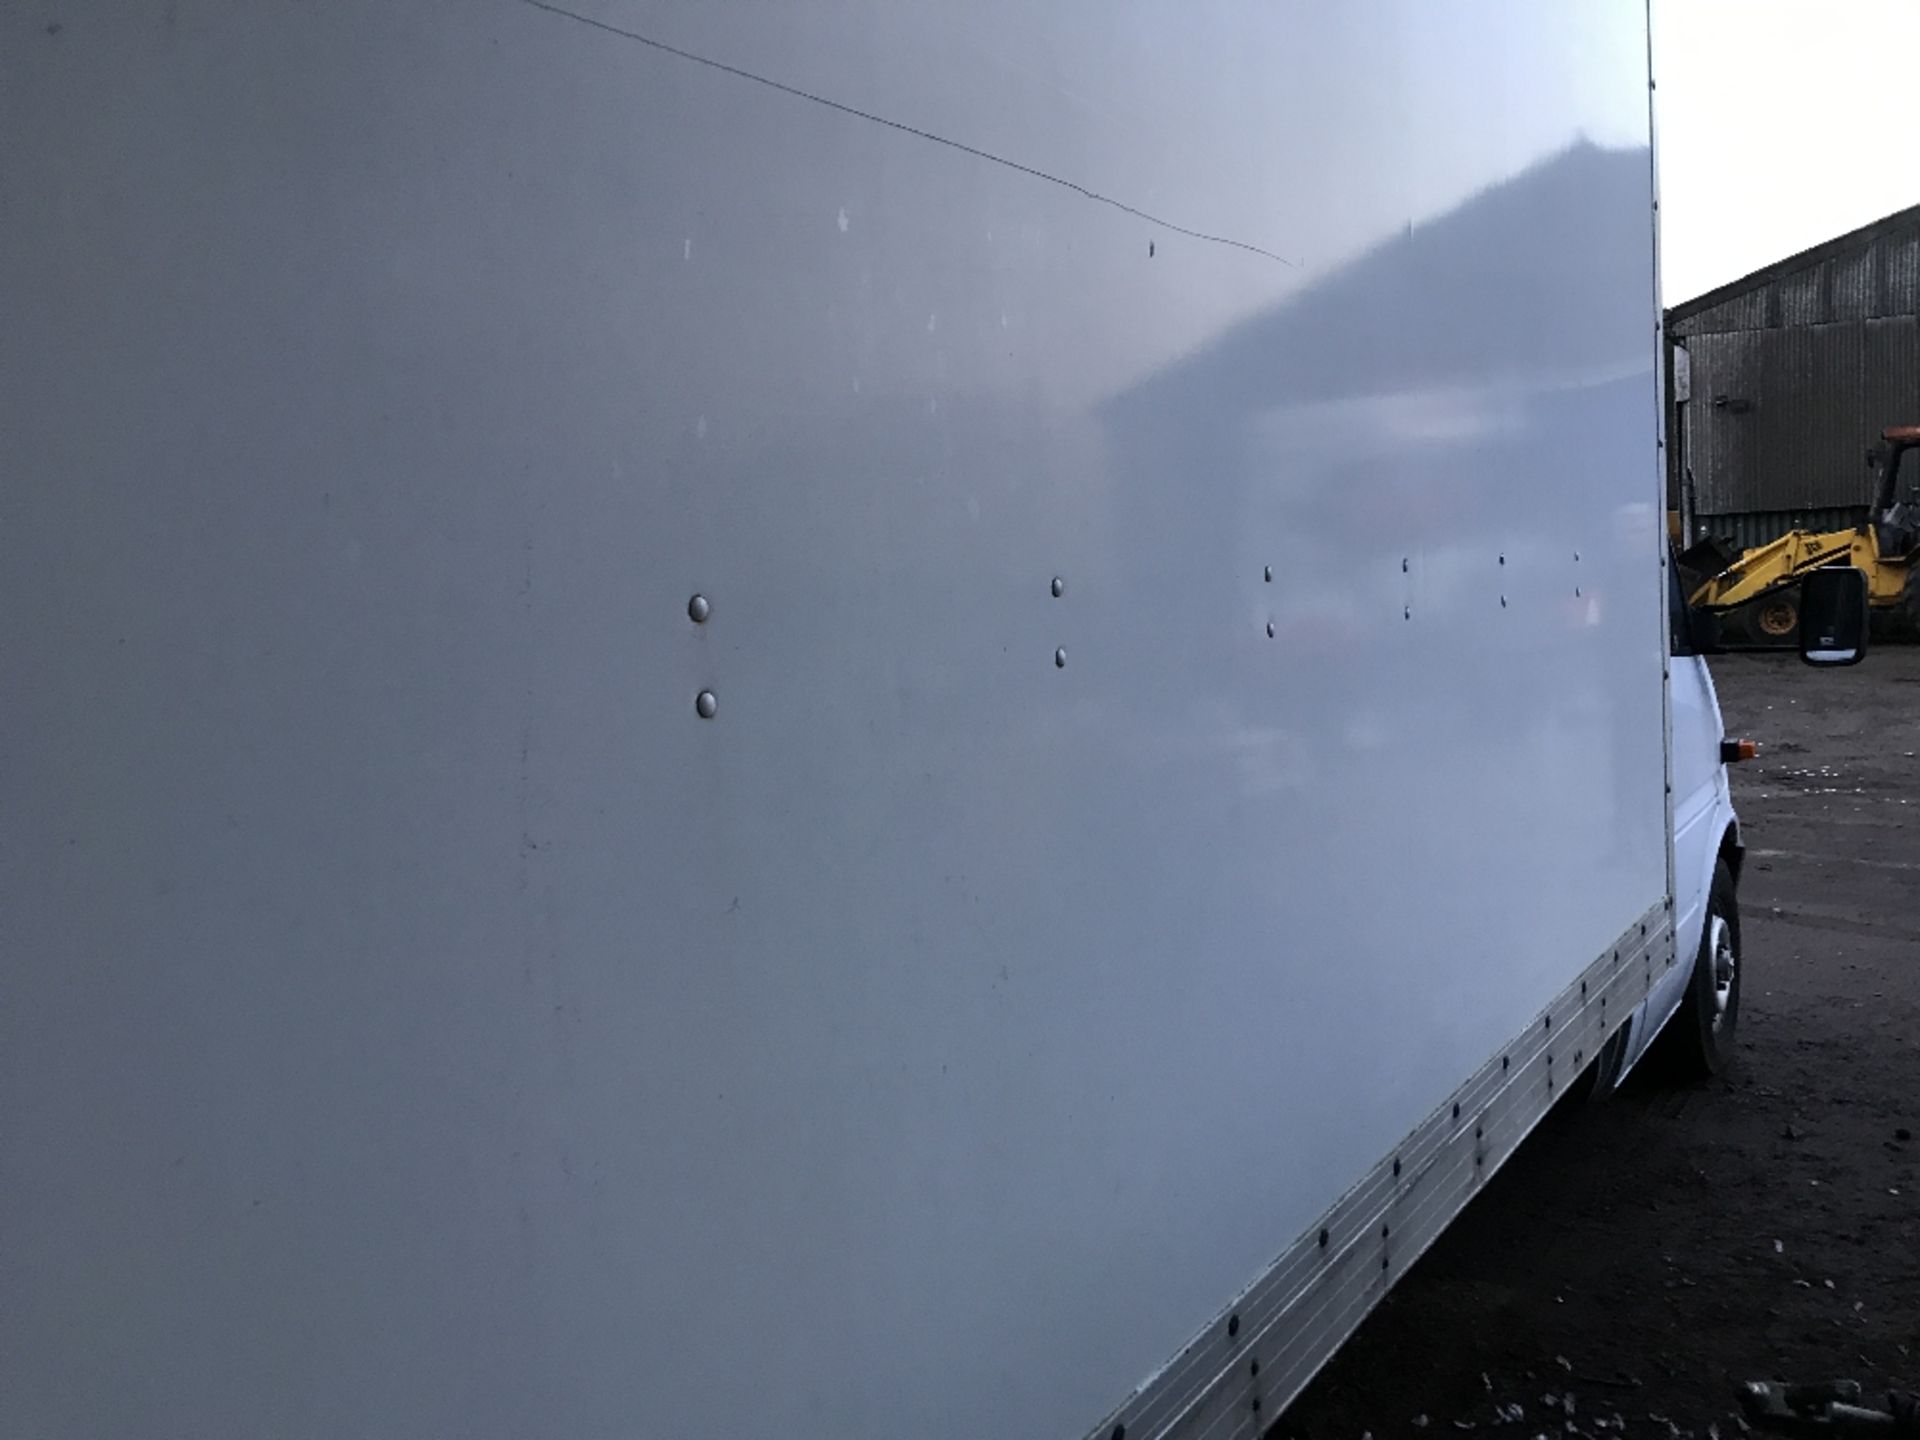 MERCEDES LUTON BODIED VAN C/W TAIL LIFT REG:V460 EUY, TEST TO AUG.2019 NO VAT ON HAMMER PRICE WHEN - Image 7 of 7